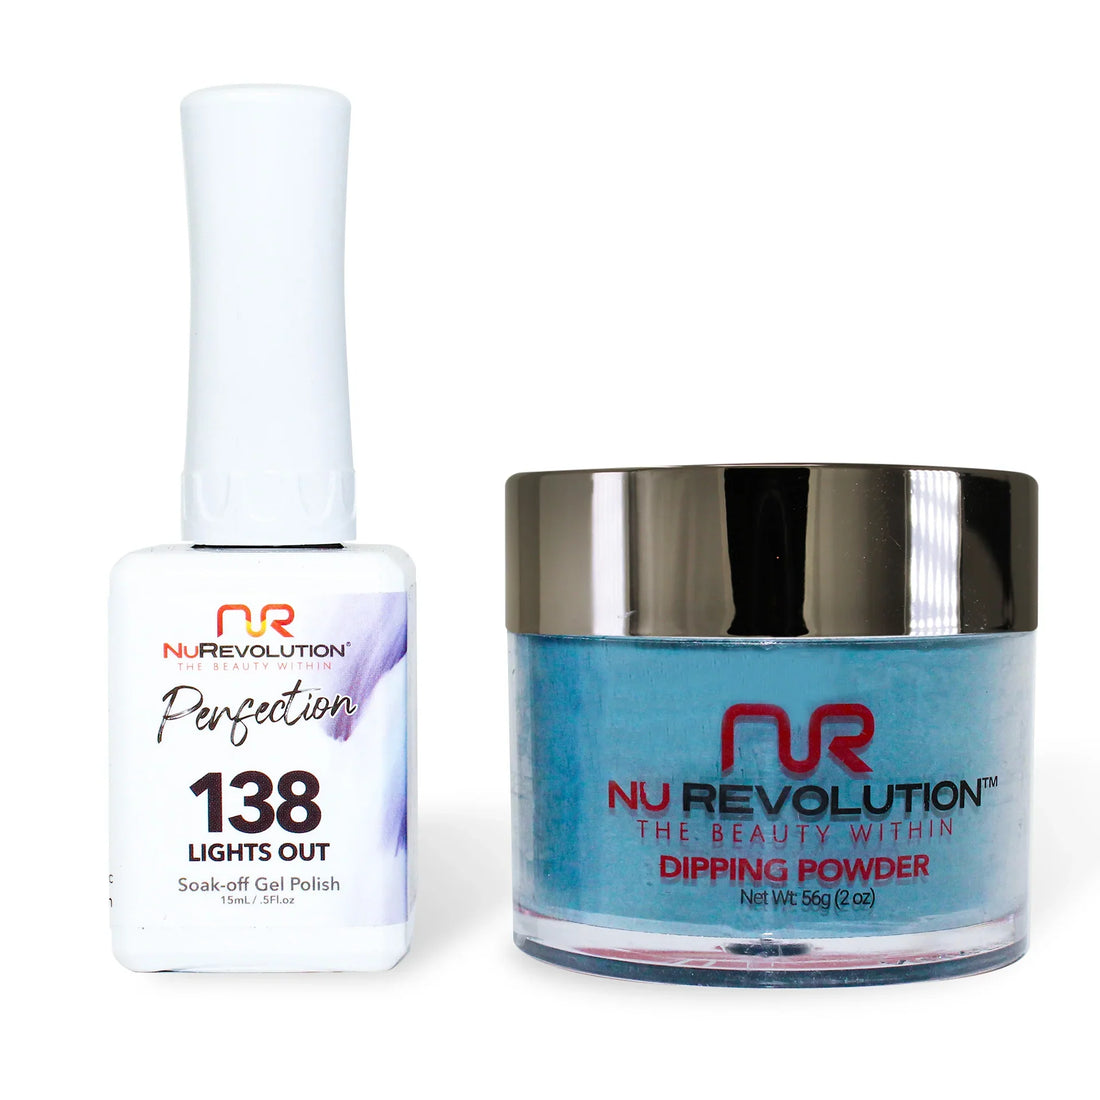 NuRevolution Perfection 138 Lights Out